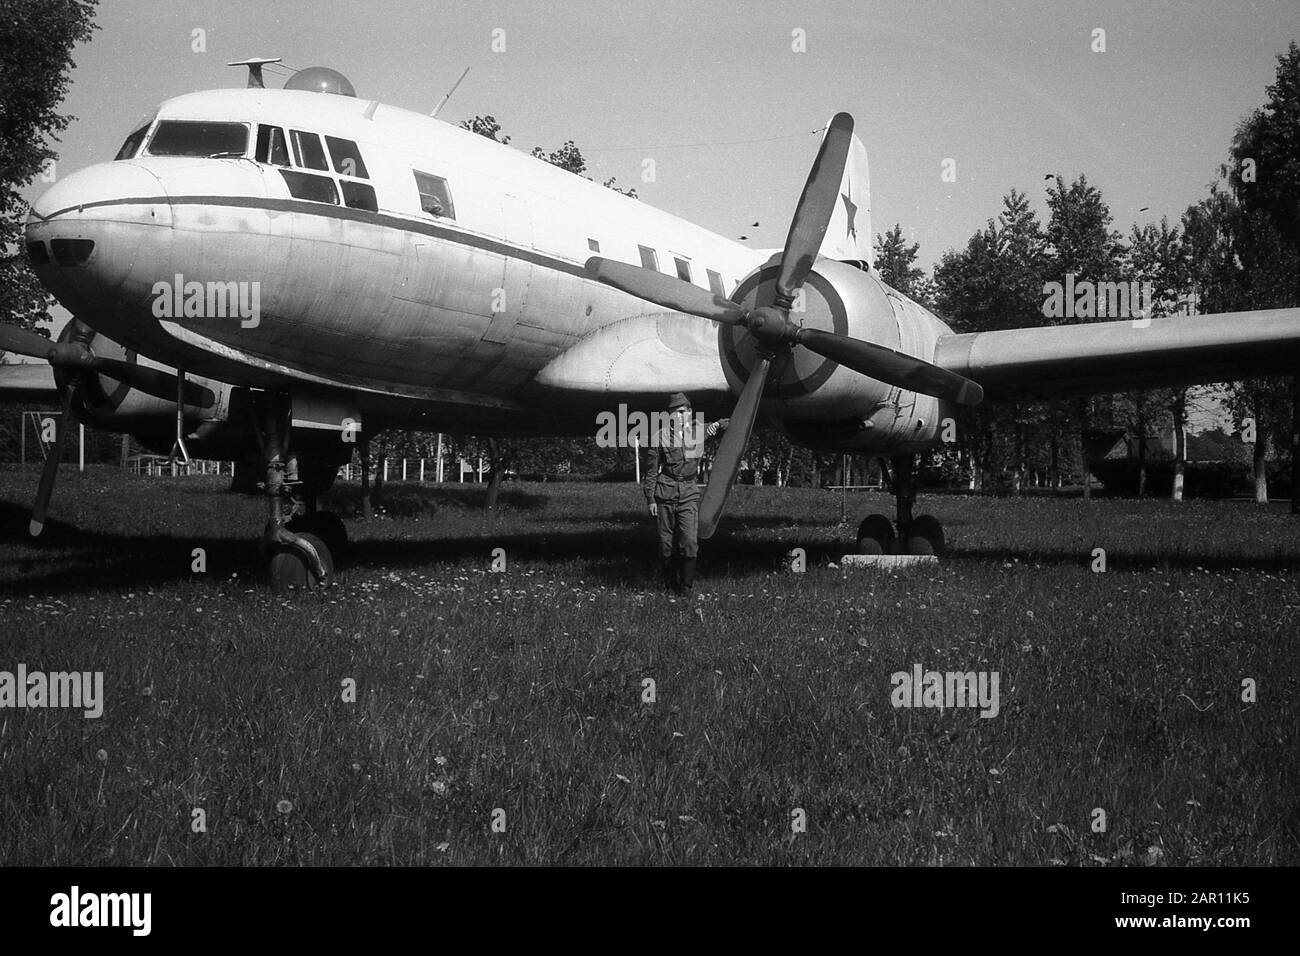 STUPINO, MOSCOW REGION, RUSSIA - CIRCA 1992: A soldier of the Russian army on the background of a Soviet twin-engine military cargo transport aircraft Ilyushin Il-14. Black and white. Film scan. Large grain. Stock Photo